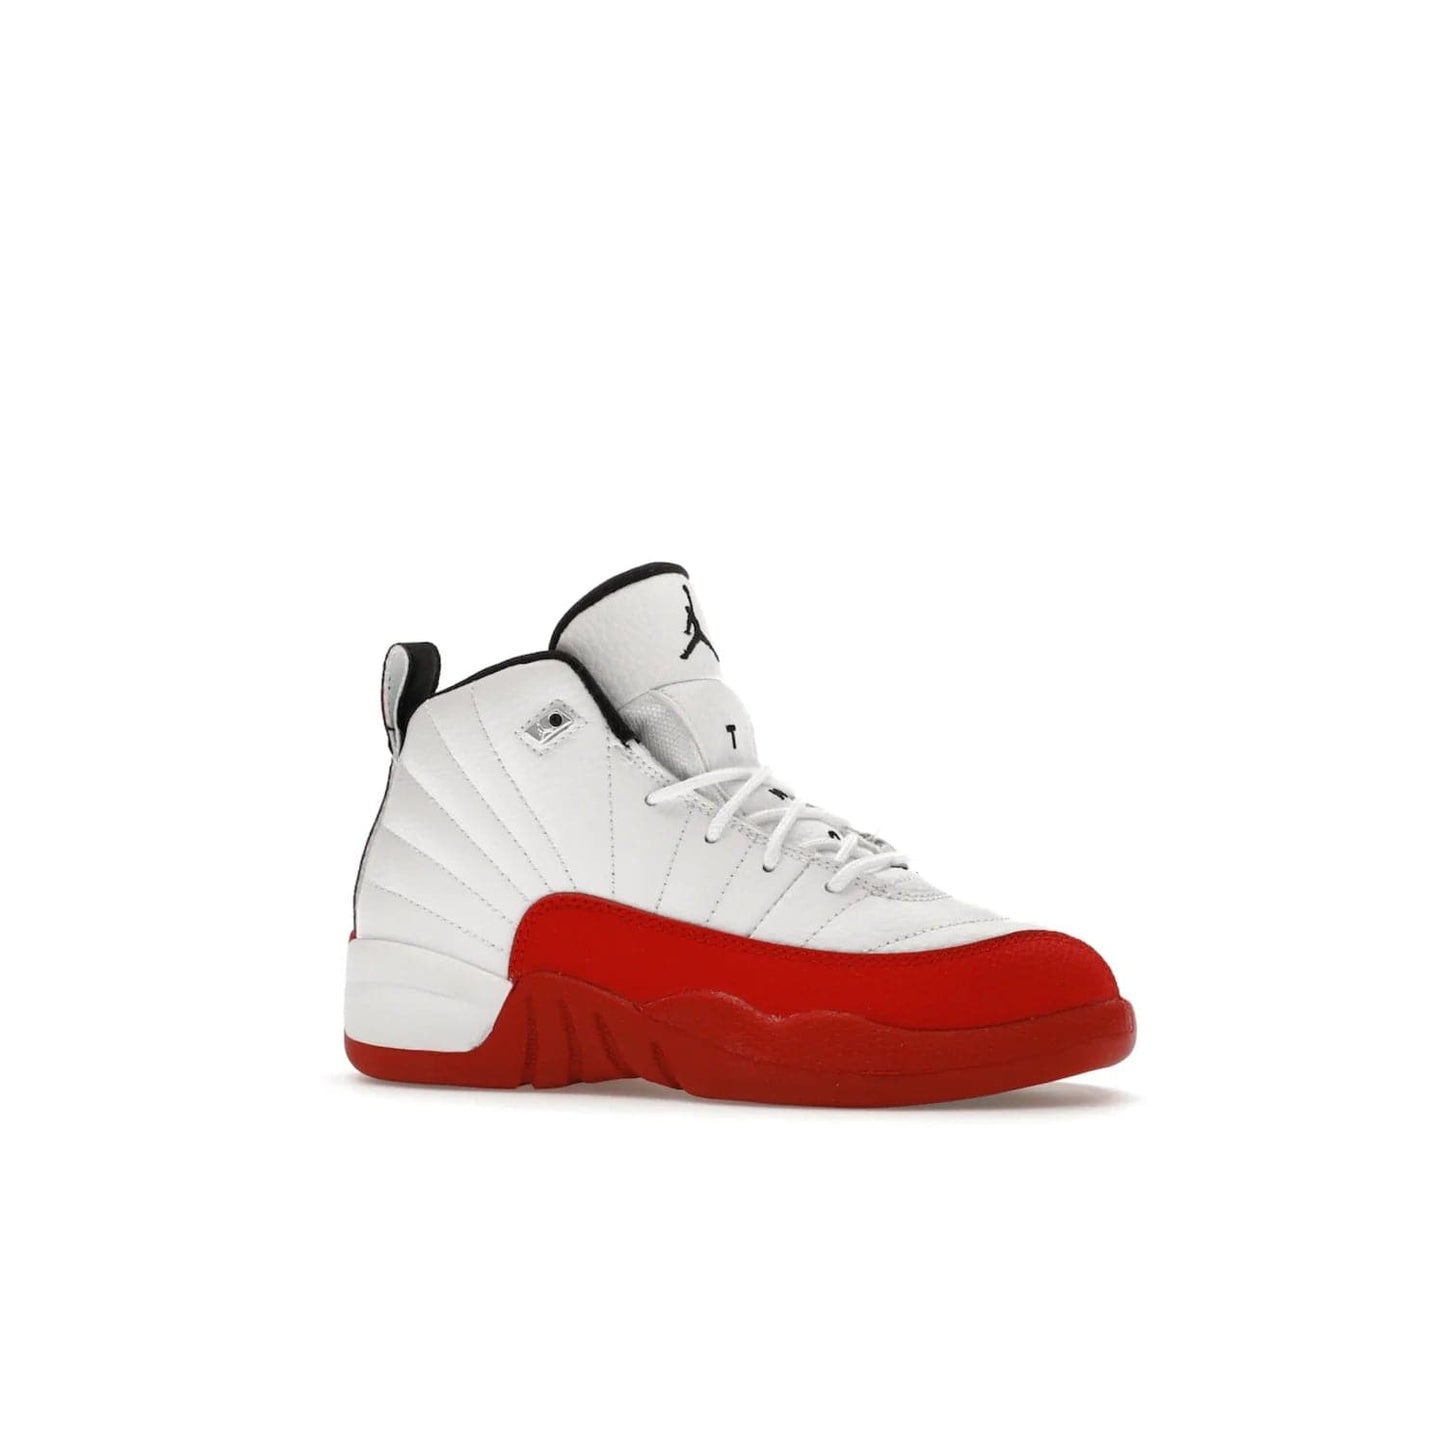 Jordan 12 Retro Cherry (2023) (PS) - Image 3 - Only at www.BallersClubKickz.com - Jordan 12 Retro Cherry dropping for toddlers in 2023! White leather upper with black overlays and red branding. Classic court style for your little one.